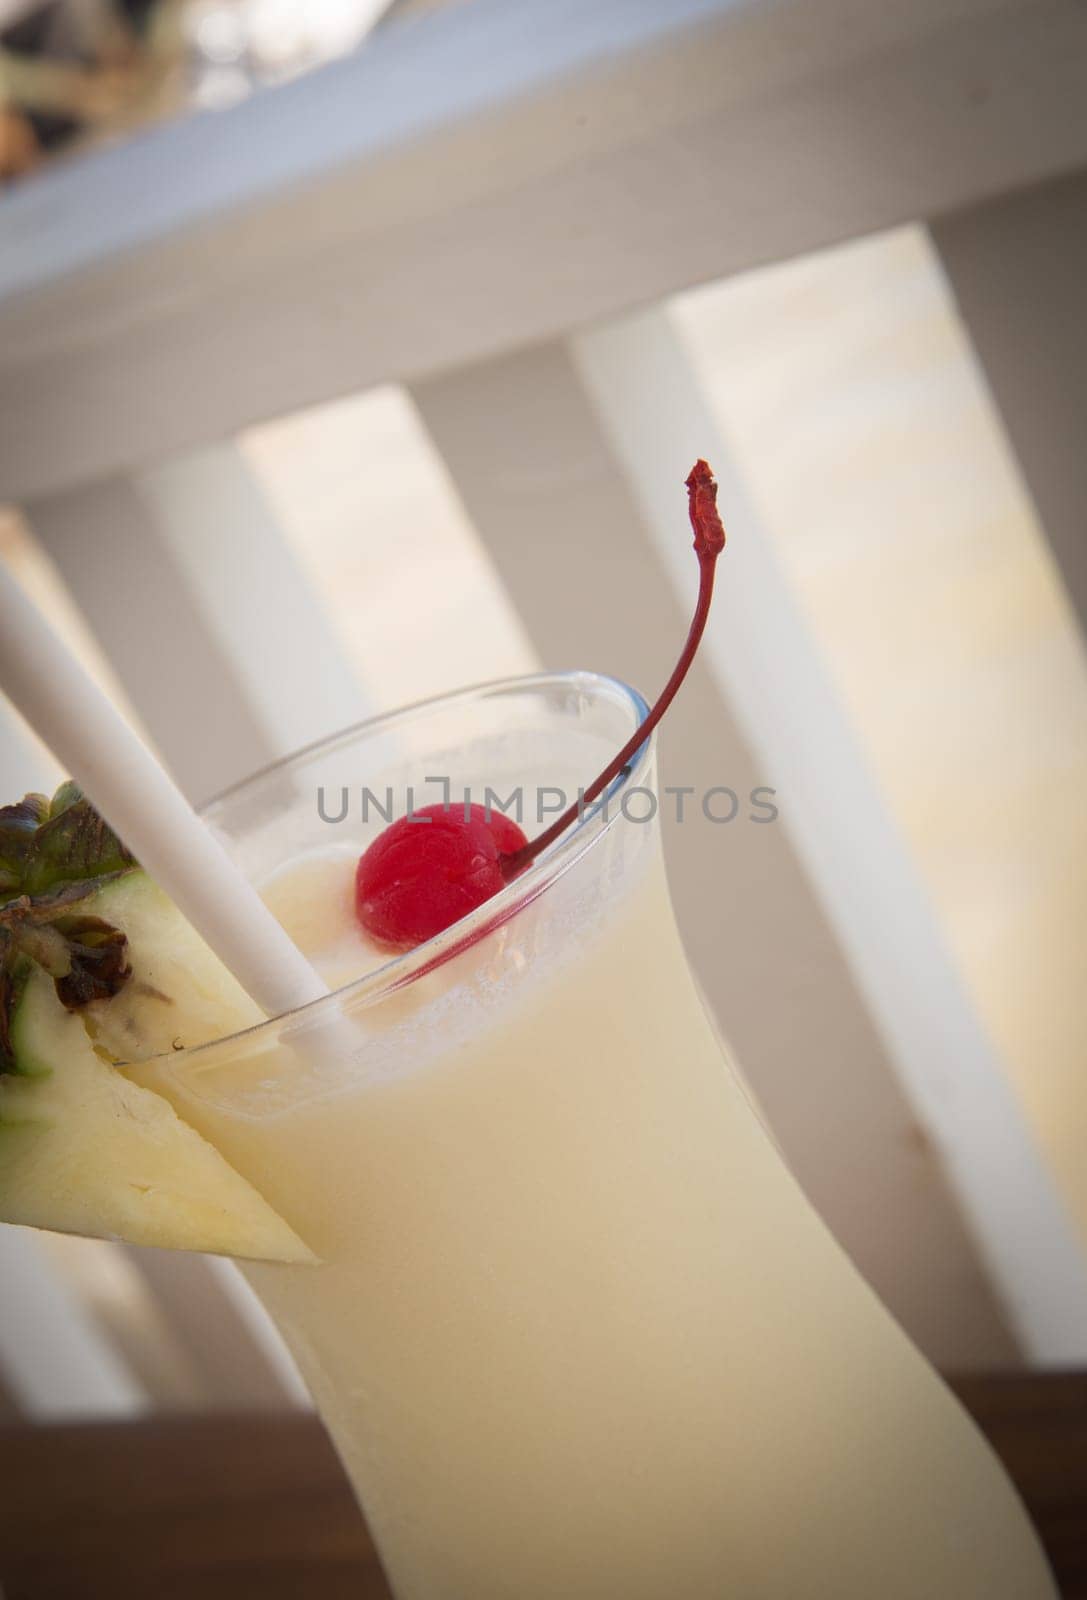 Tropical Pina Colada served with a cherry and pineapple